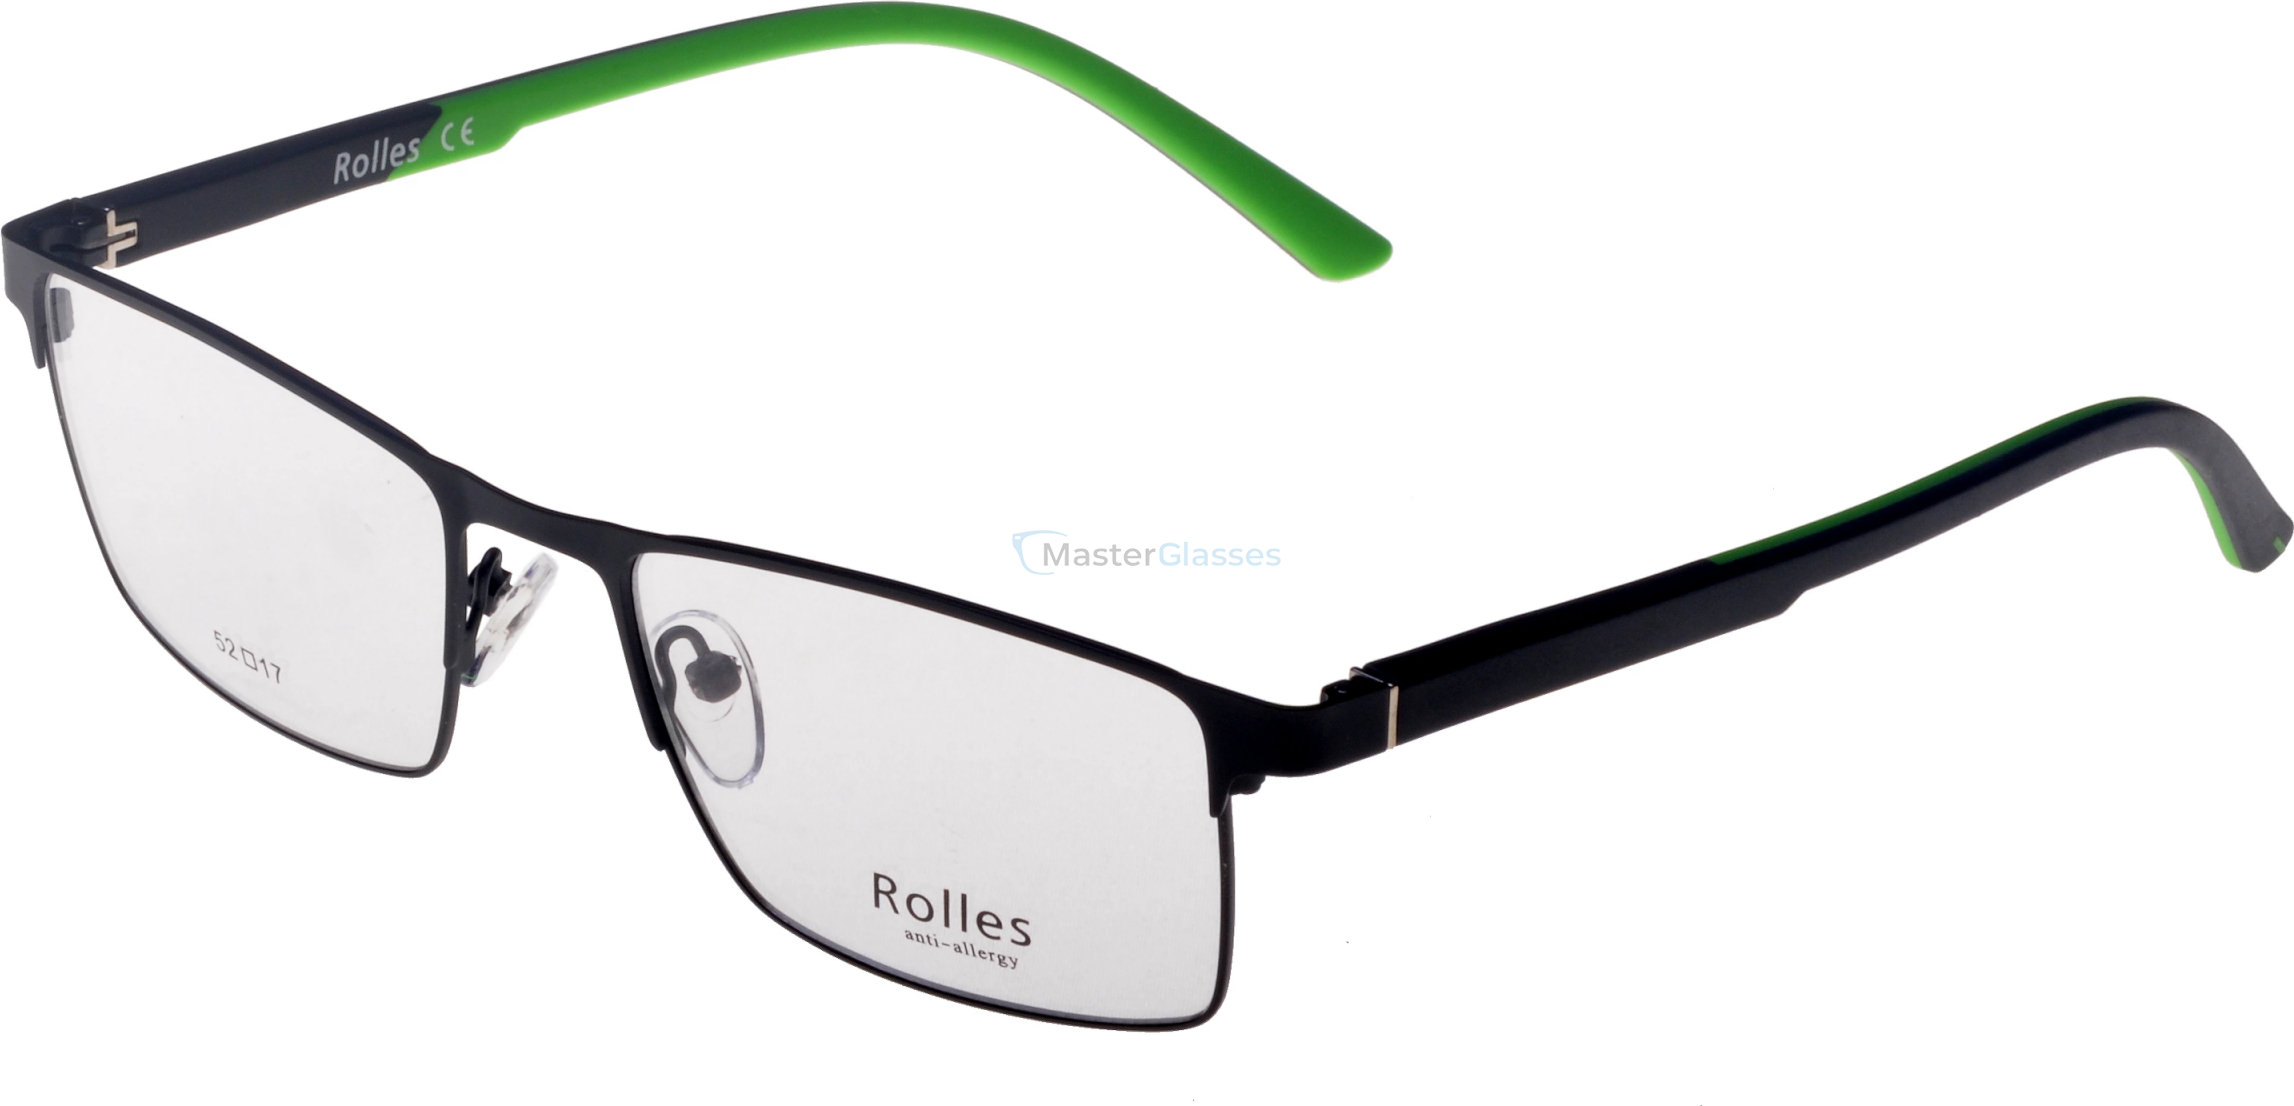  Rolles 623 02